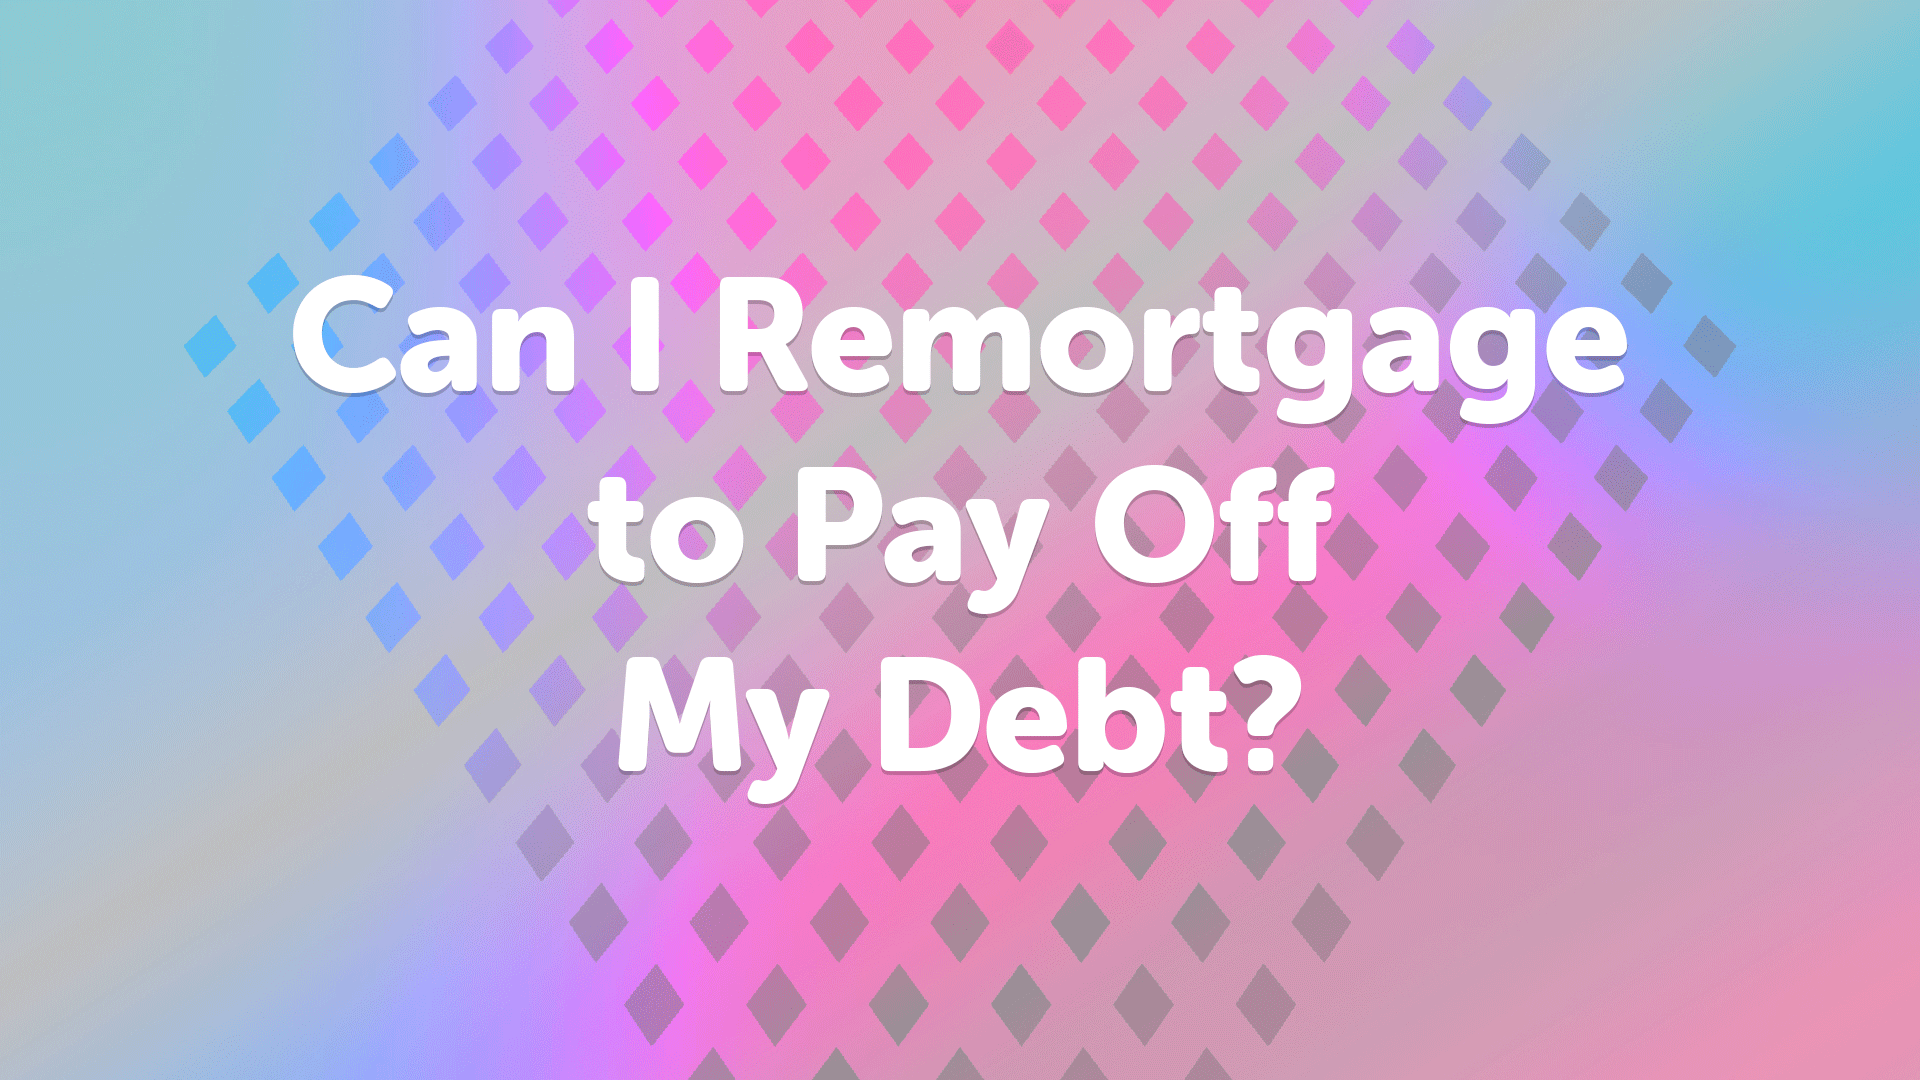 Remortgage to Pay Off Debt Sheffield